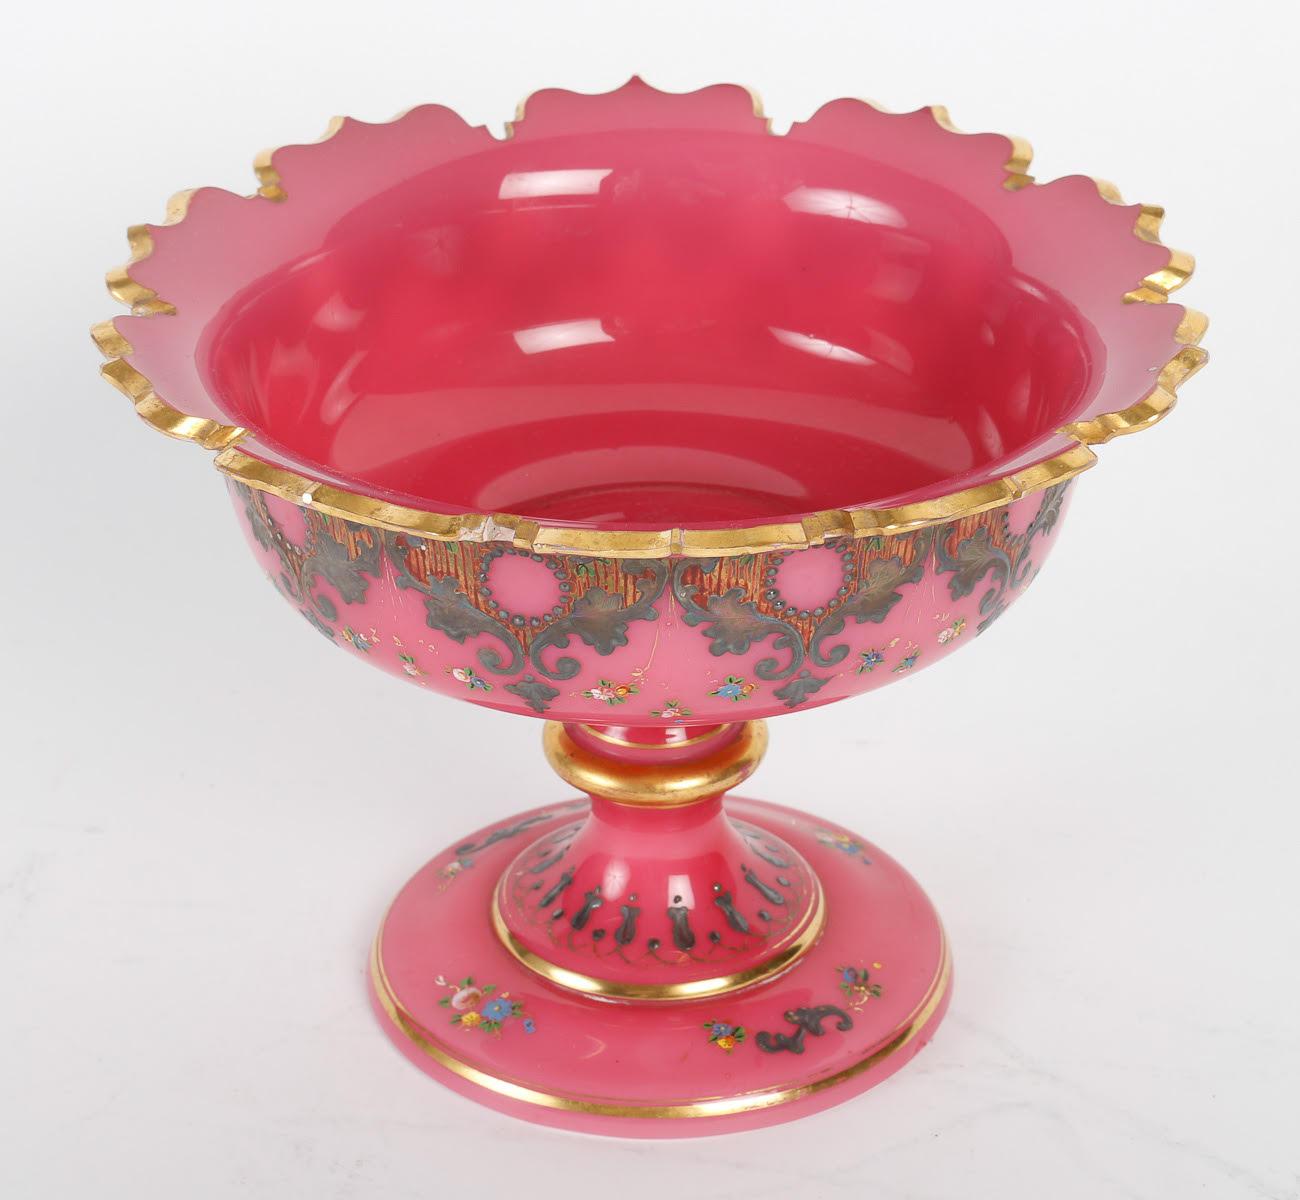 Napoleon III White and Pink Opaline Service Enamelled with Silver and Gold, 19th Century.